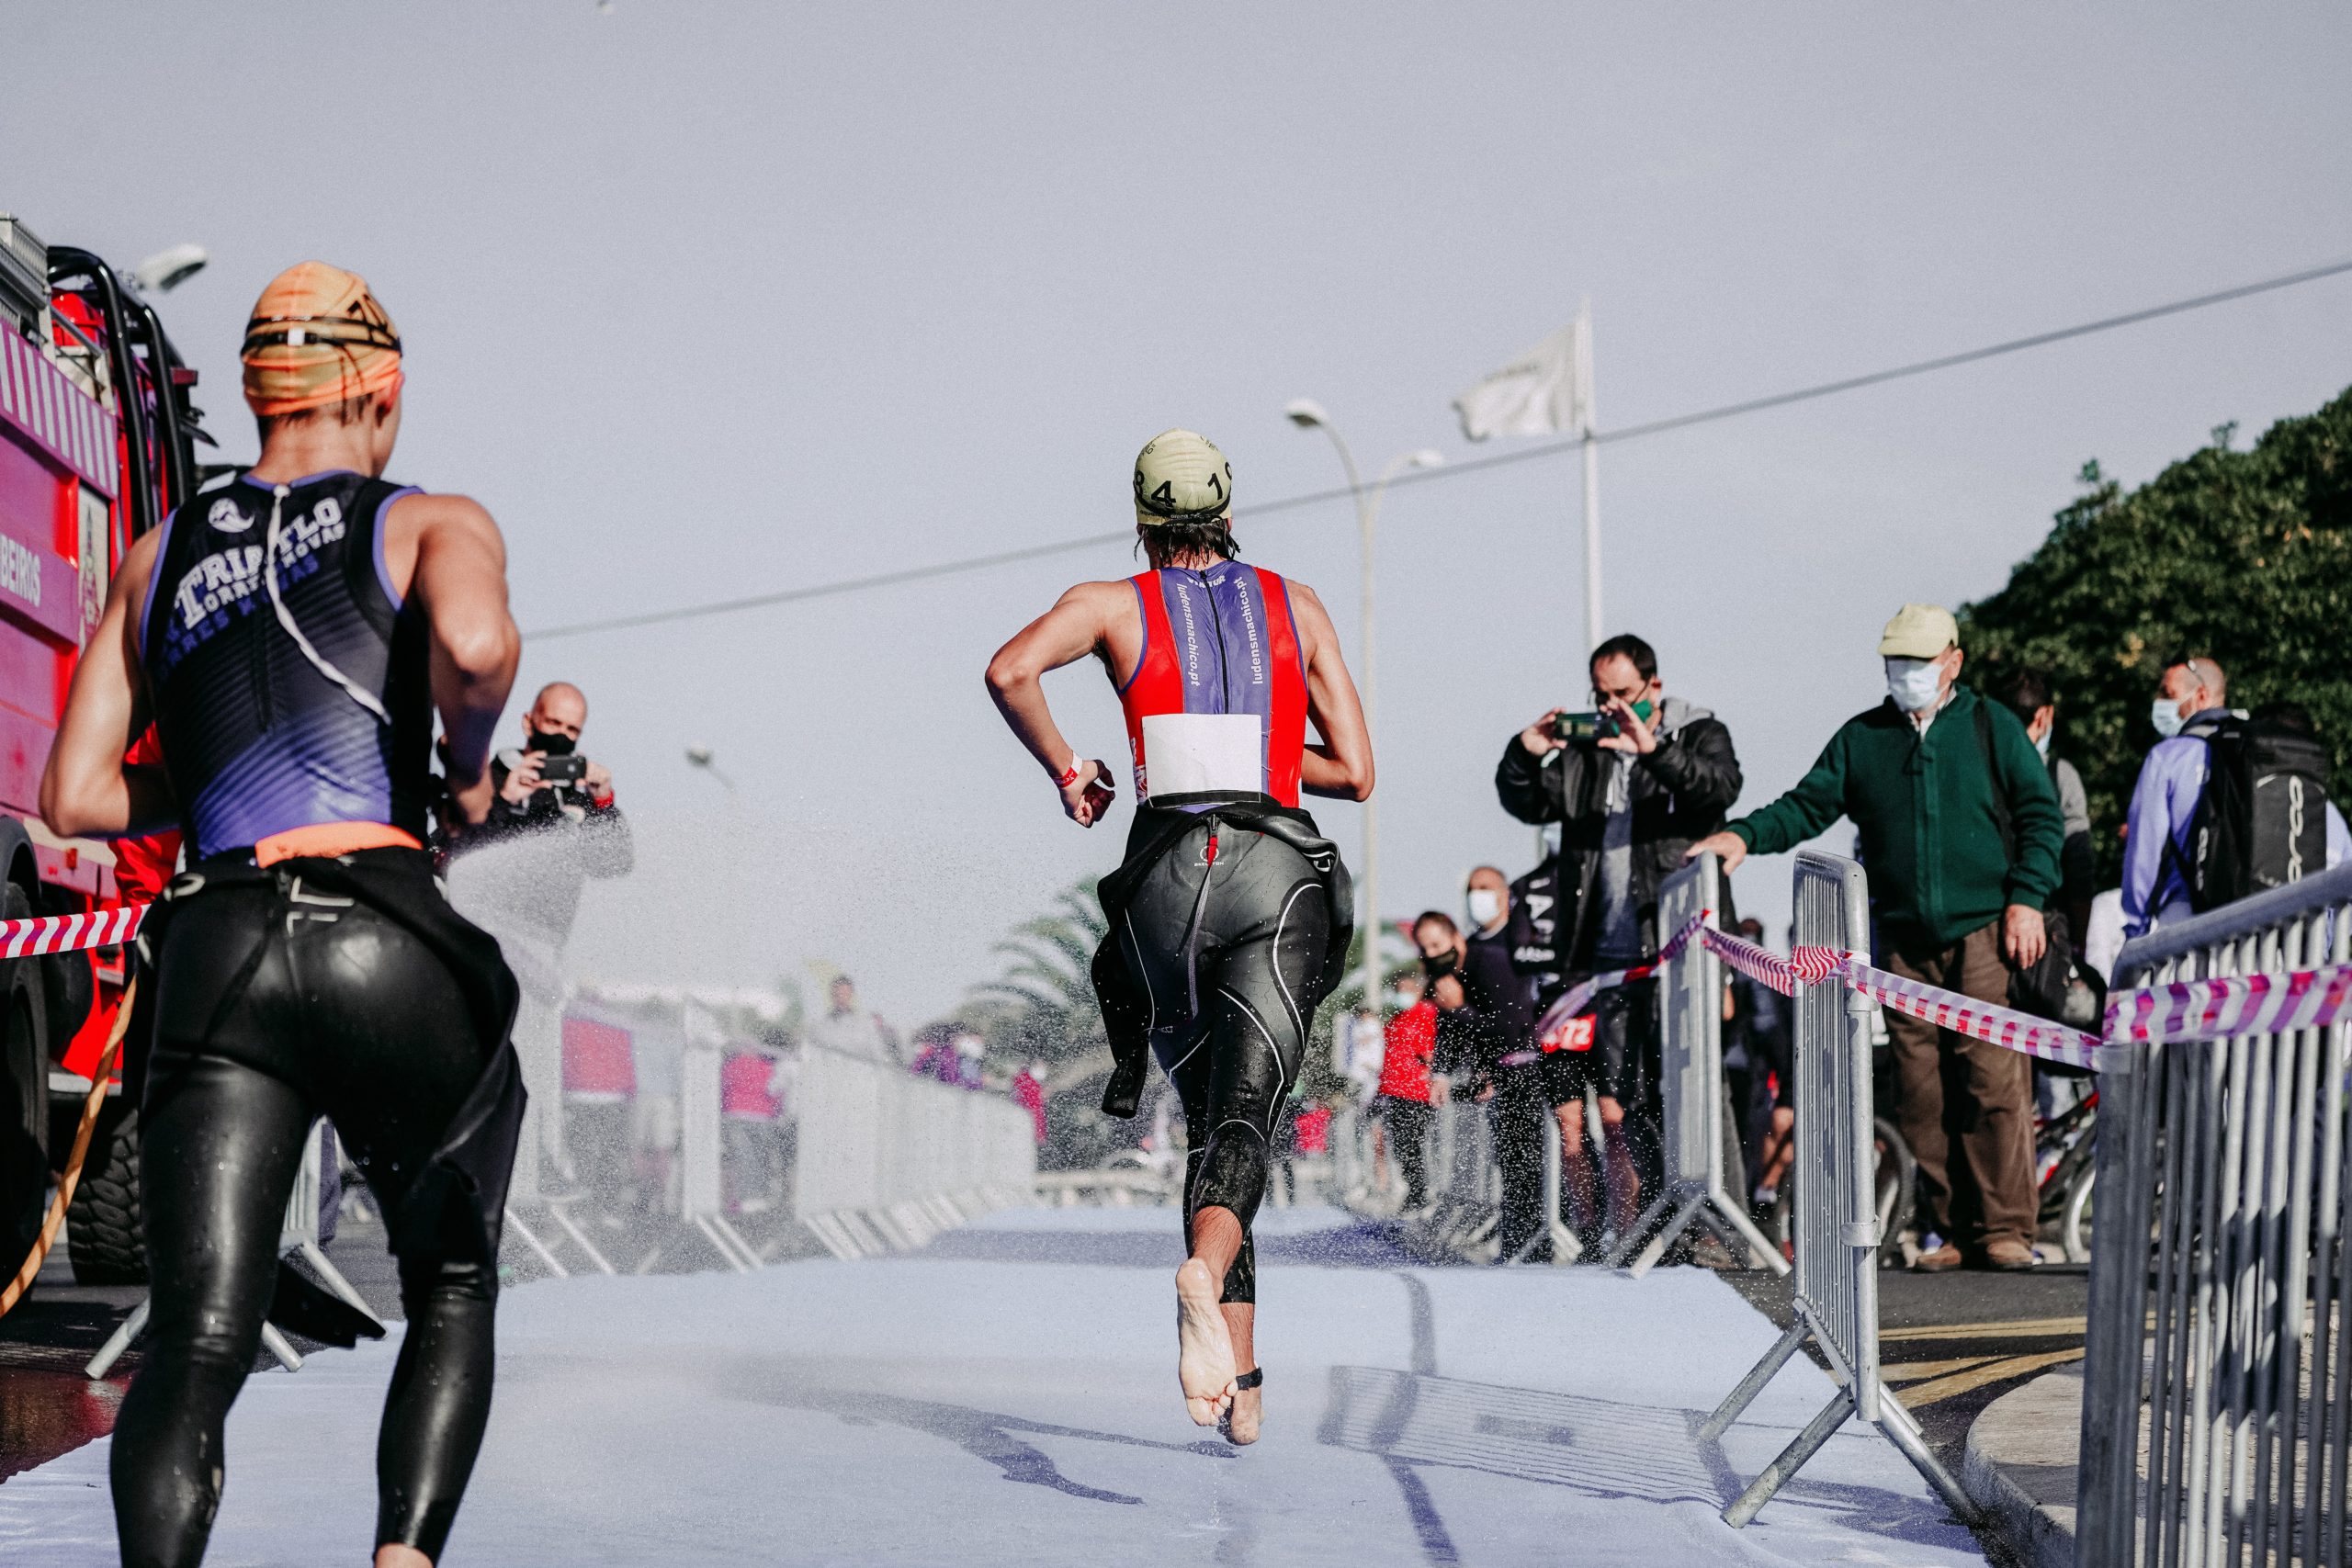 Set your triathlon transition game up for success: minimize time and maximize performance on race day.